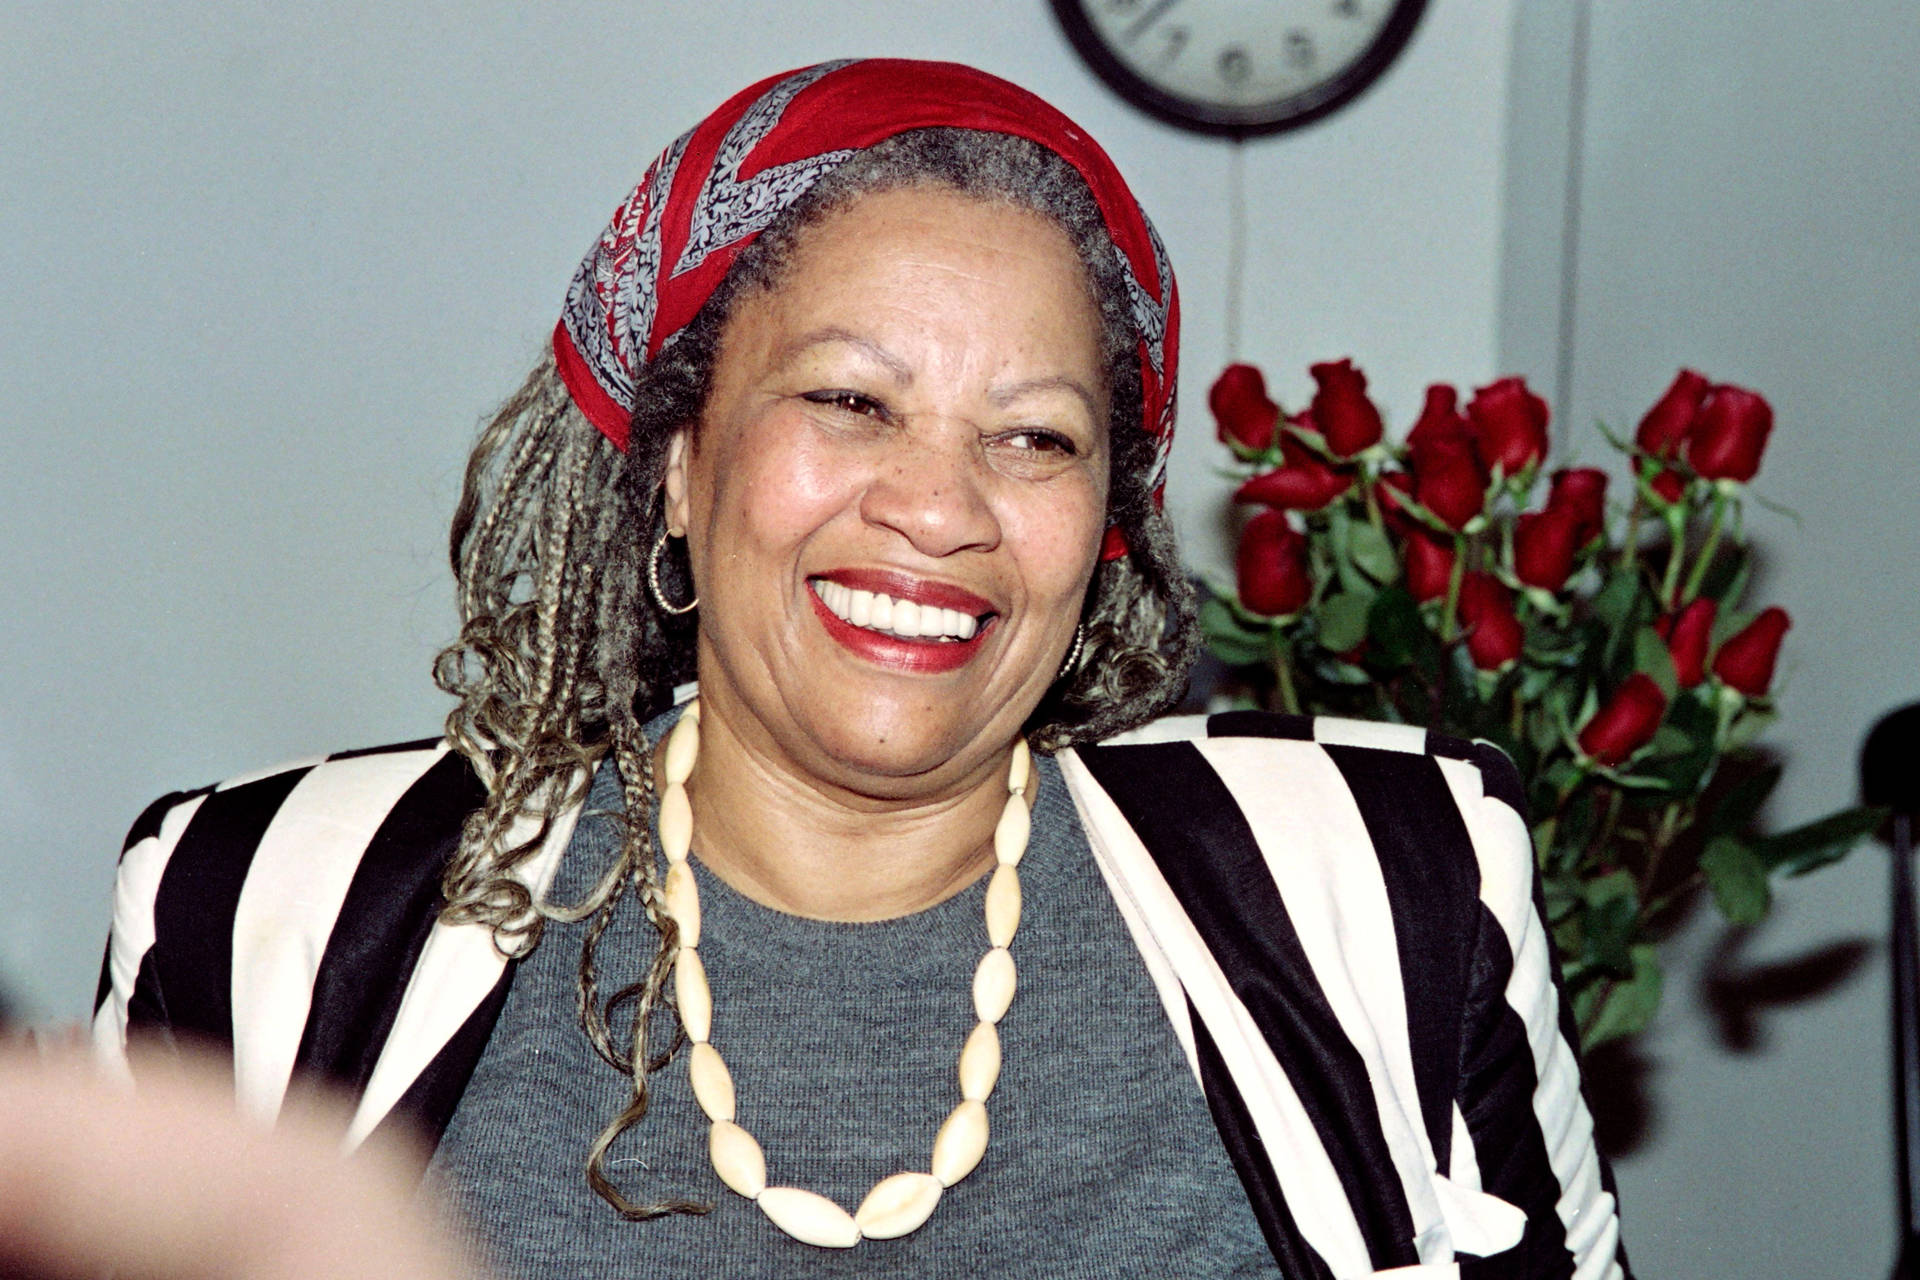 U.S. author Toni Morrison smiles in her office at Princeton University in New Jersey, while being interviewed by reporters on October 7, 1993. - Morrison said "I am outrageously happy" after hearing that she had won the Nobel Prize for Literature. DON EMMERT/AFP/Getty Images